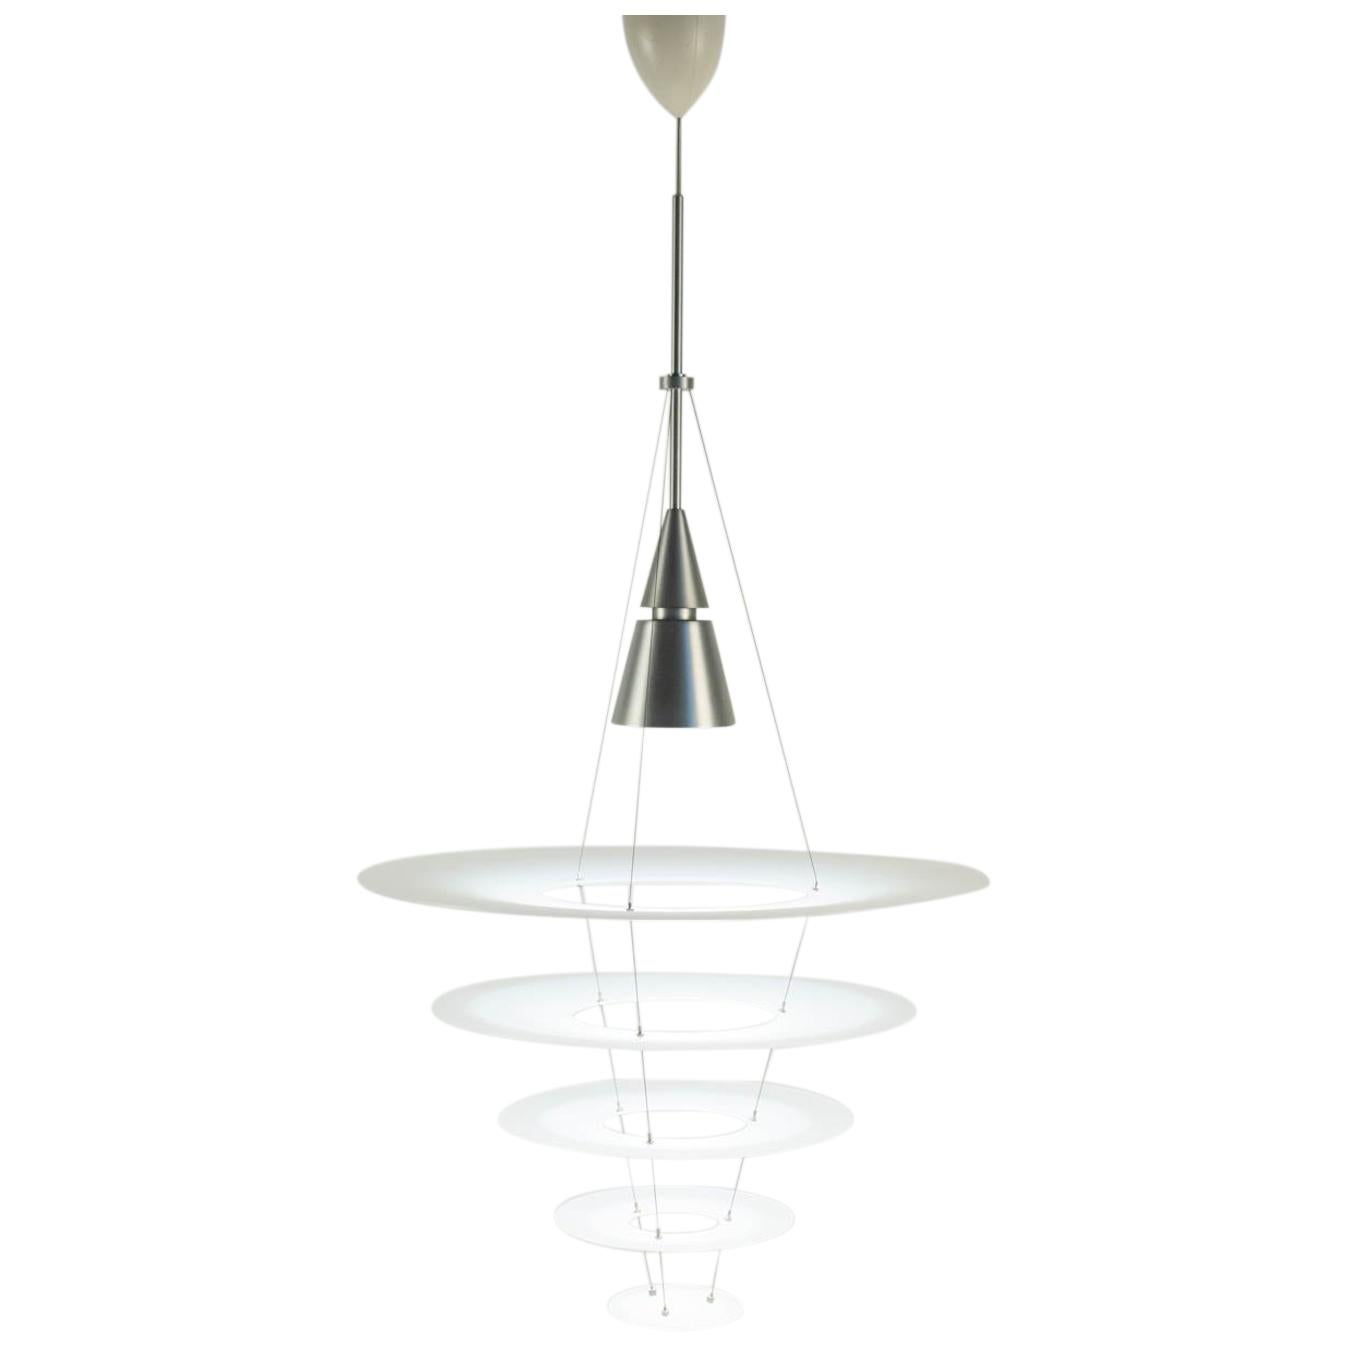 Hanging Light Fixture, Contemporary, from the House of Louis Poulsen